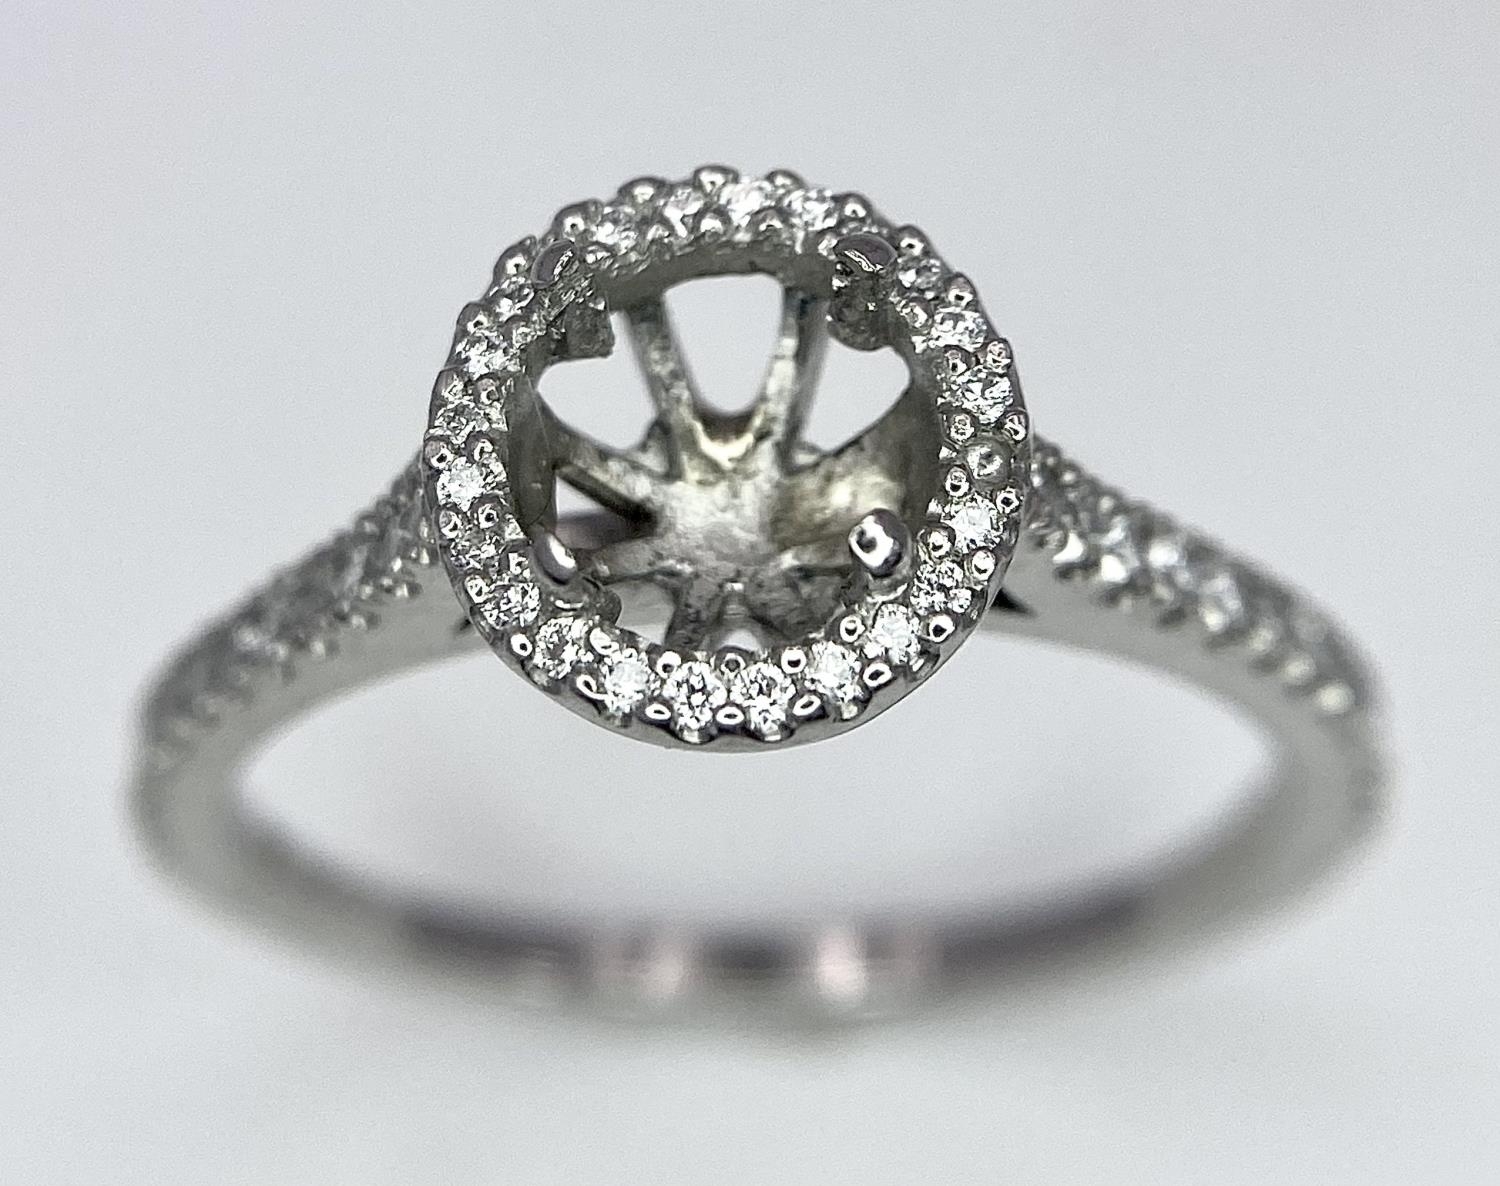 A PLATINUM DIAMOND SET HALO AND SHOULDERS RING MOUNT 0.40CT, READY TO SET YOUR DREAM GEMSTONE 4.3G